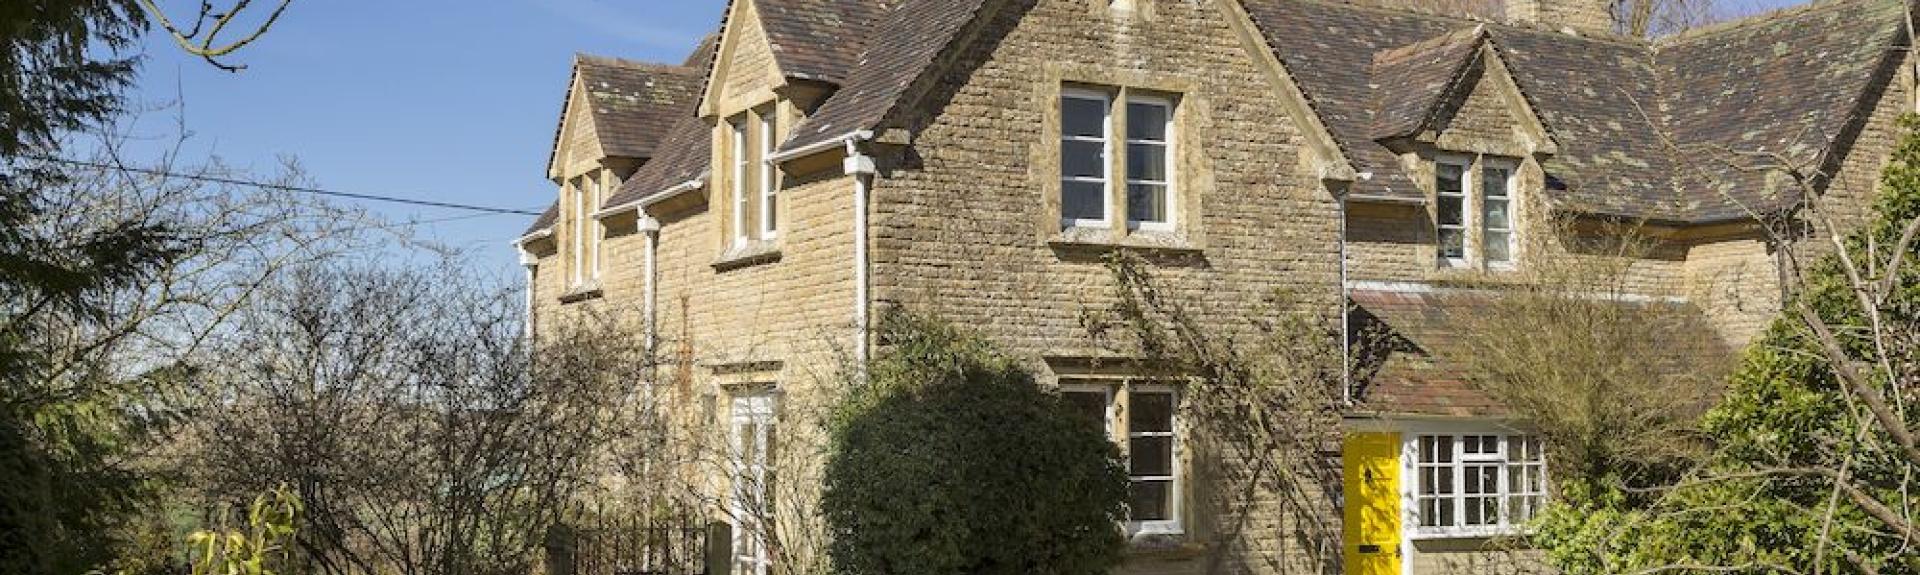 Exterior of a vine-clad Cotswold honeystone cottage in Chipping Norton.